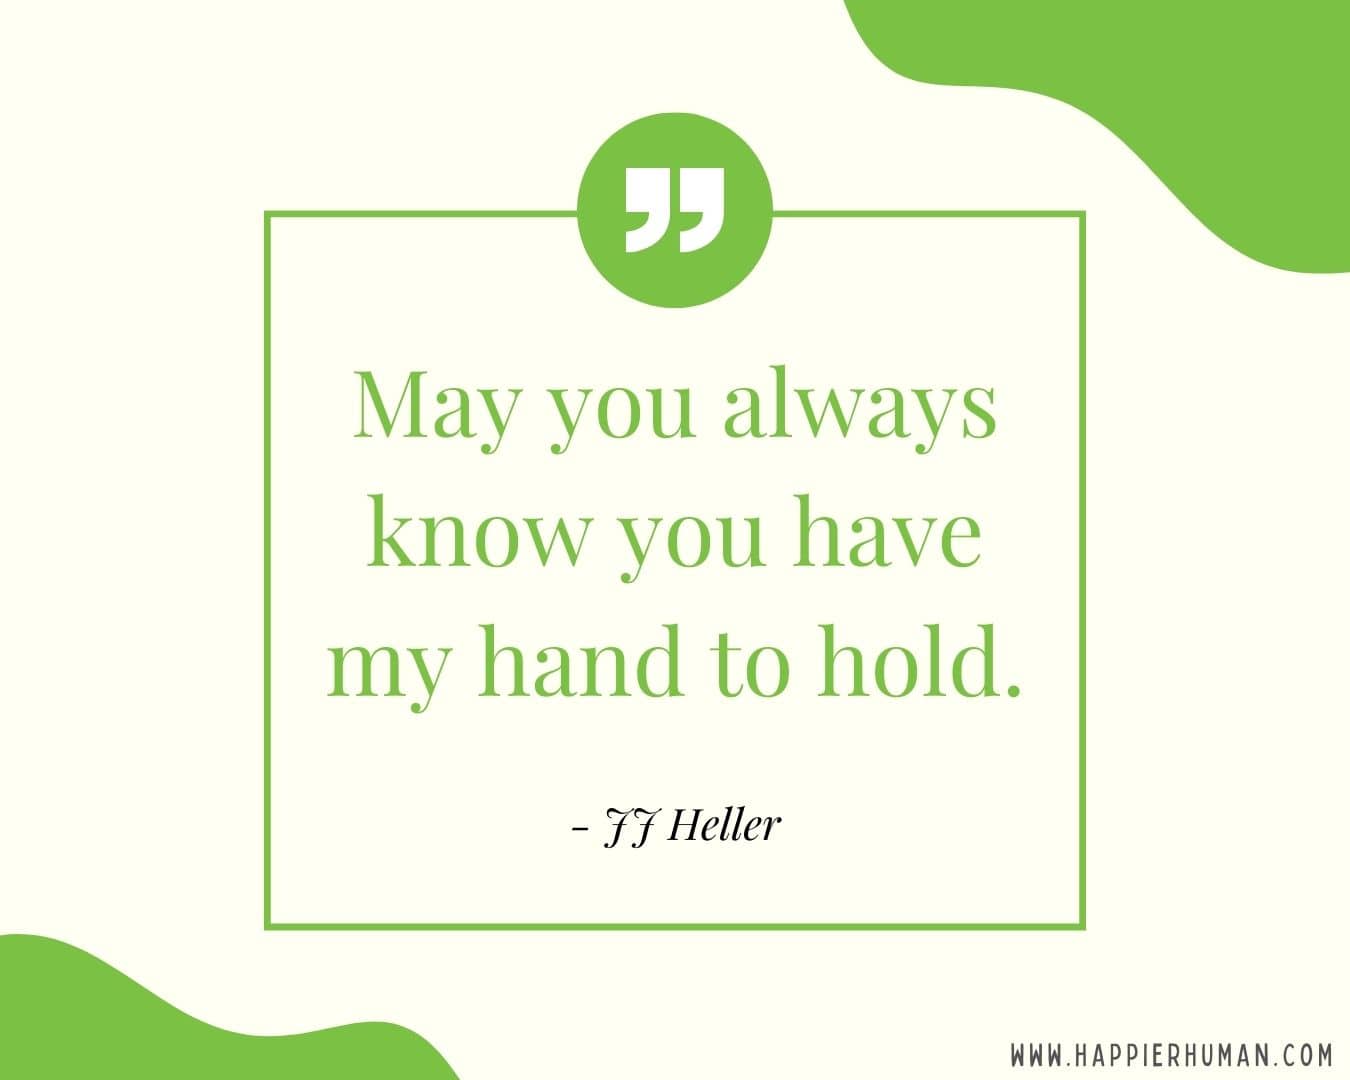 I’m Here for You Quotes - “May you always know you have my hand to hold.” – JJ Heller